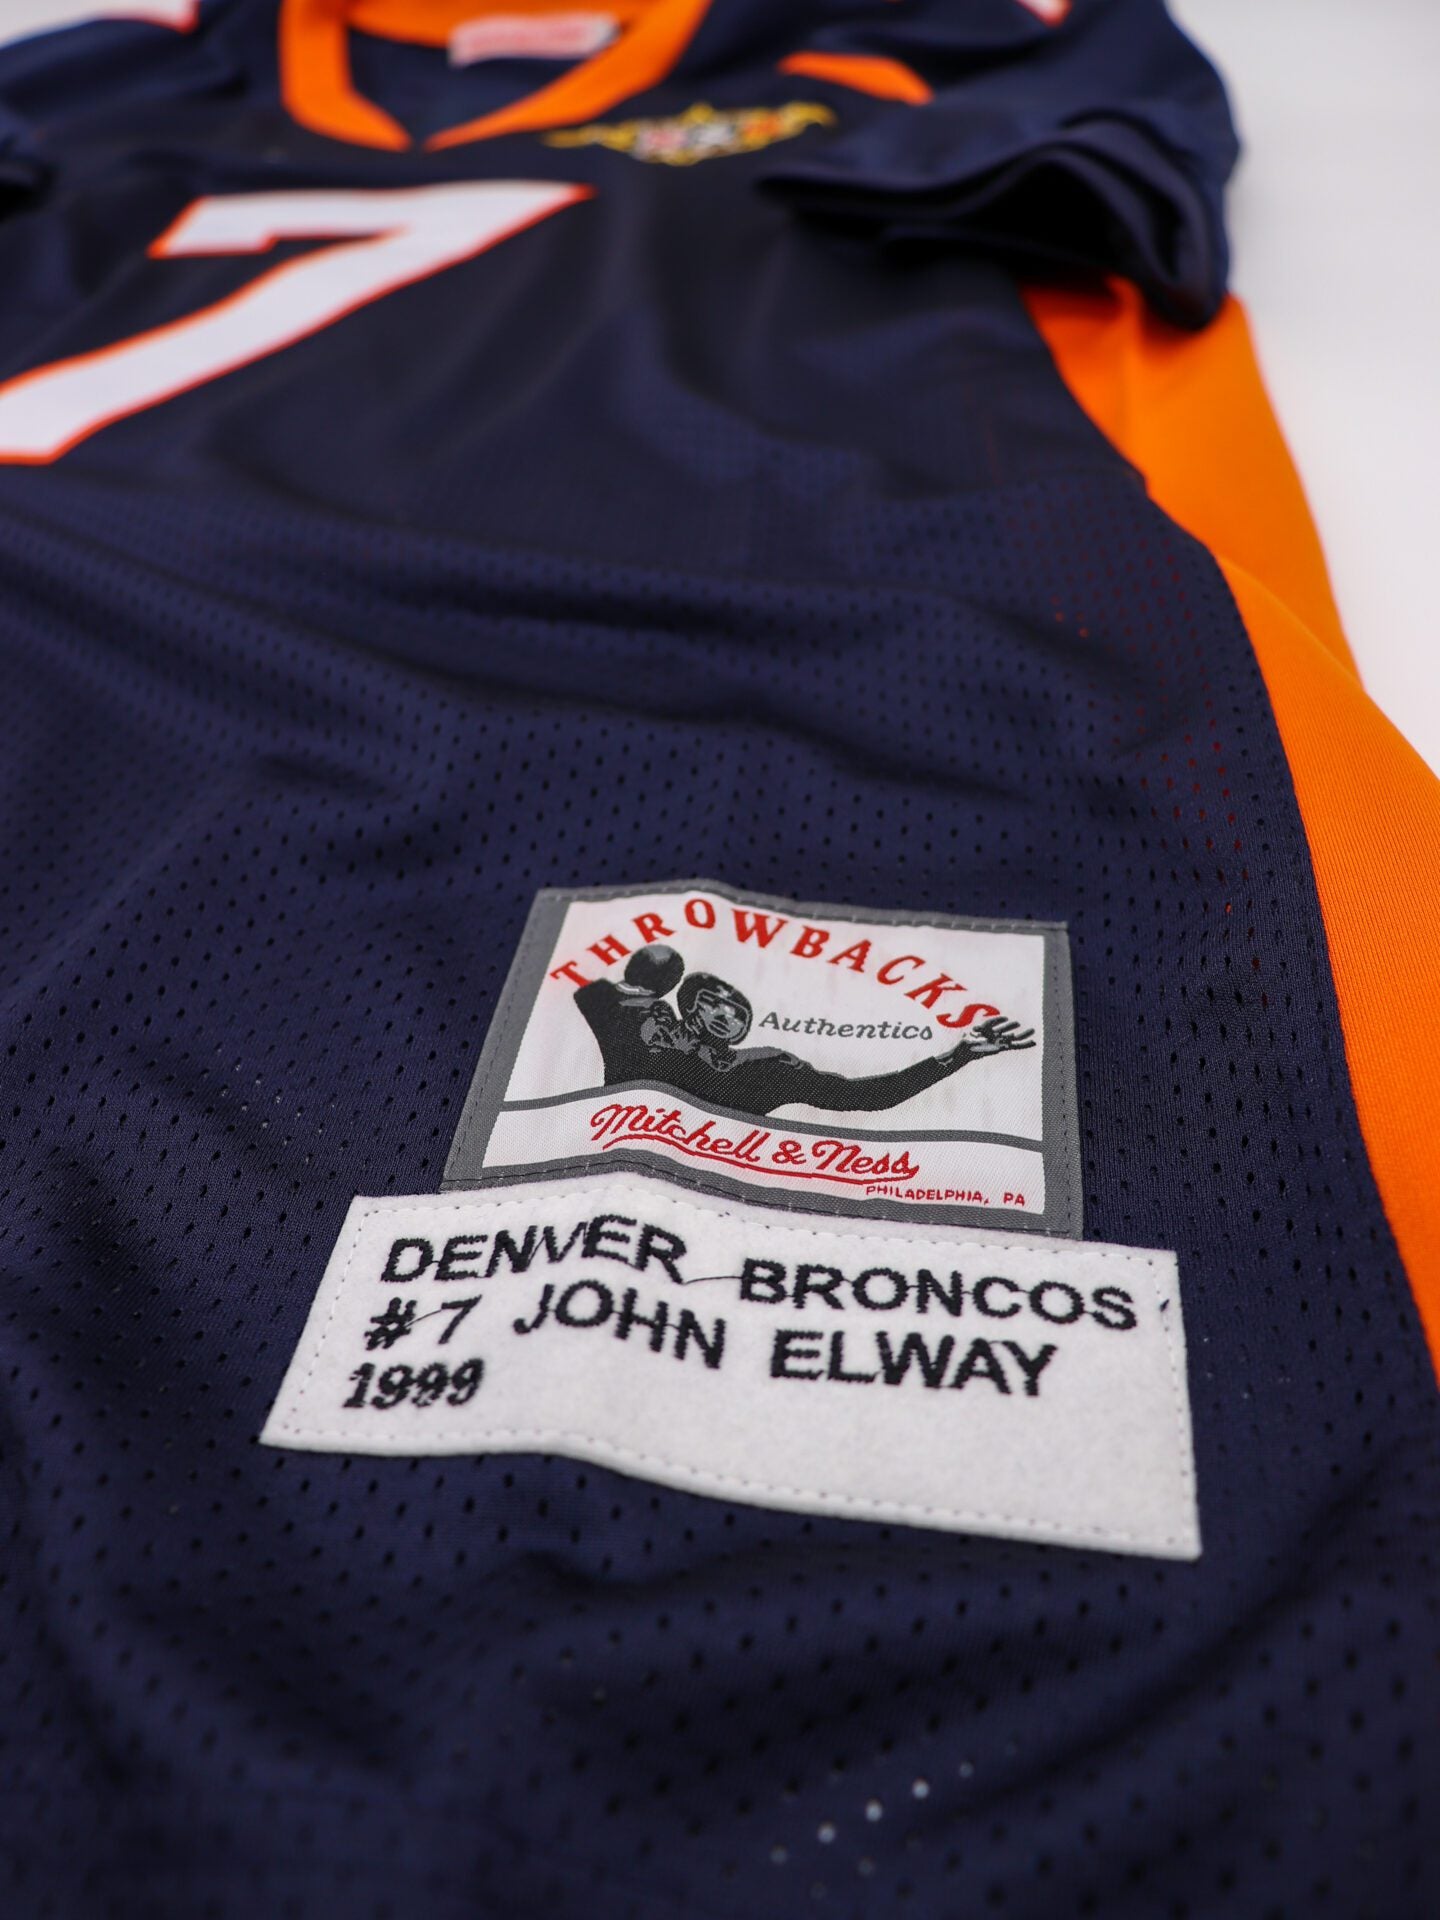 1998 Super Bowl XXXII #7 John Elway Denver Broncos Home Blue Jersey, Mitchell & Ness Size 50, New without Tags